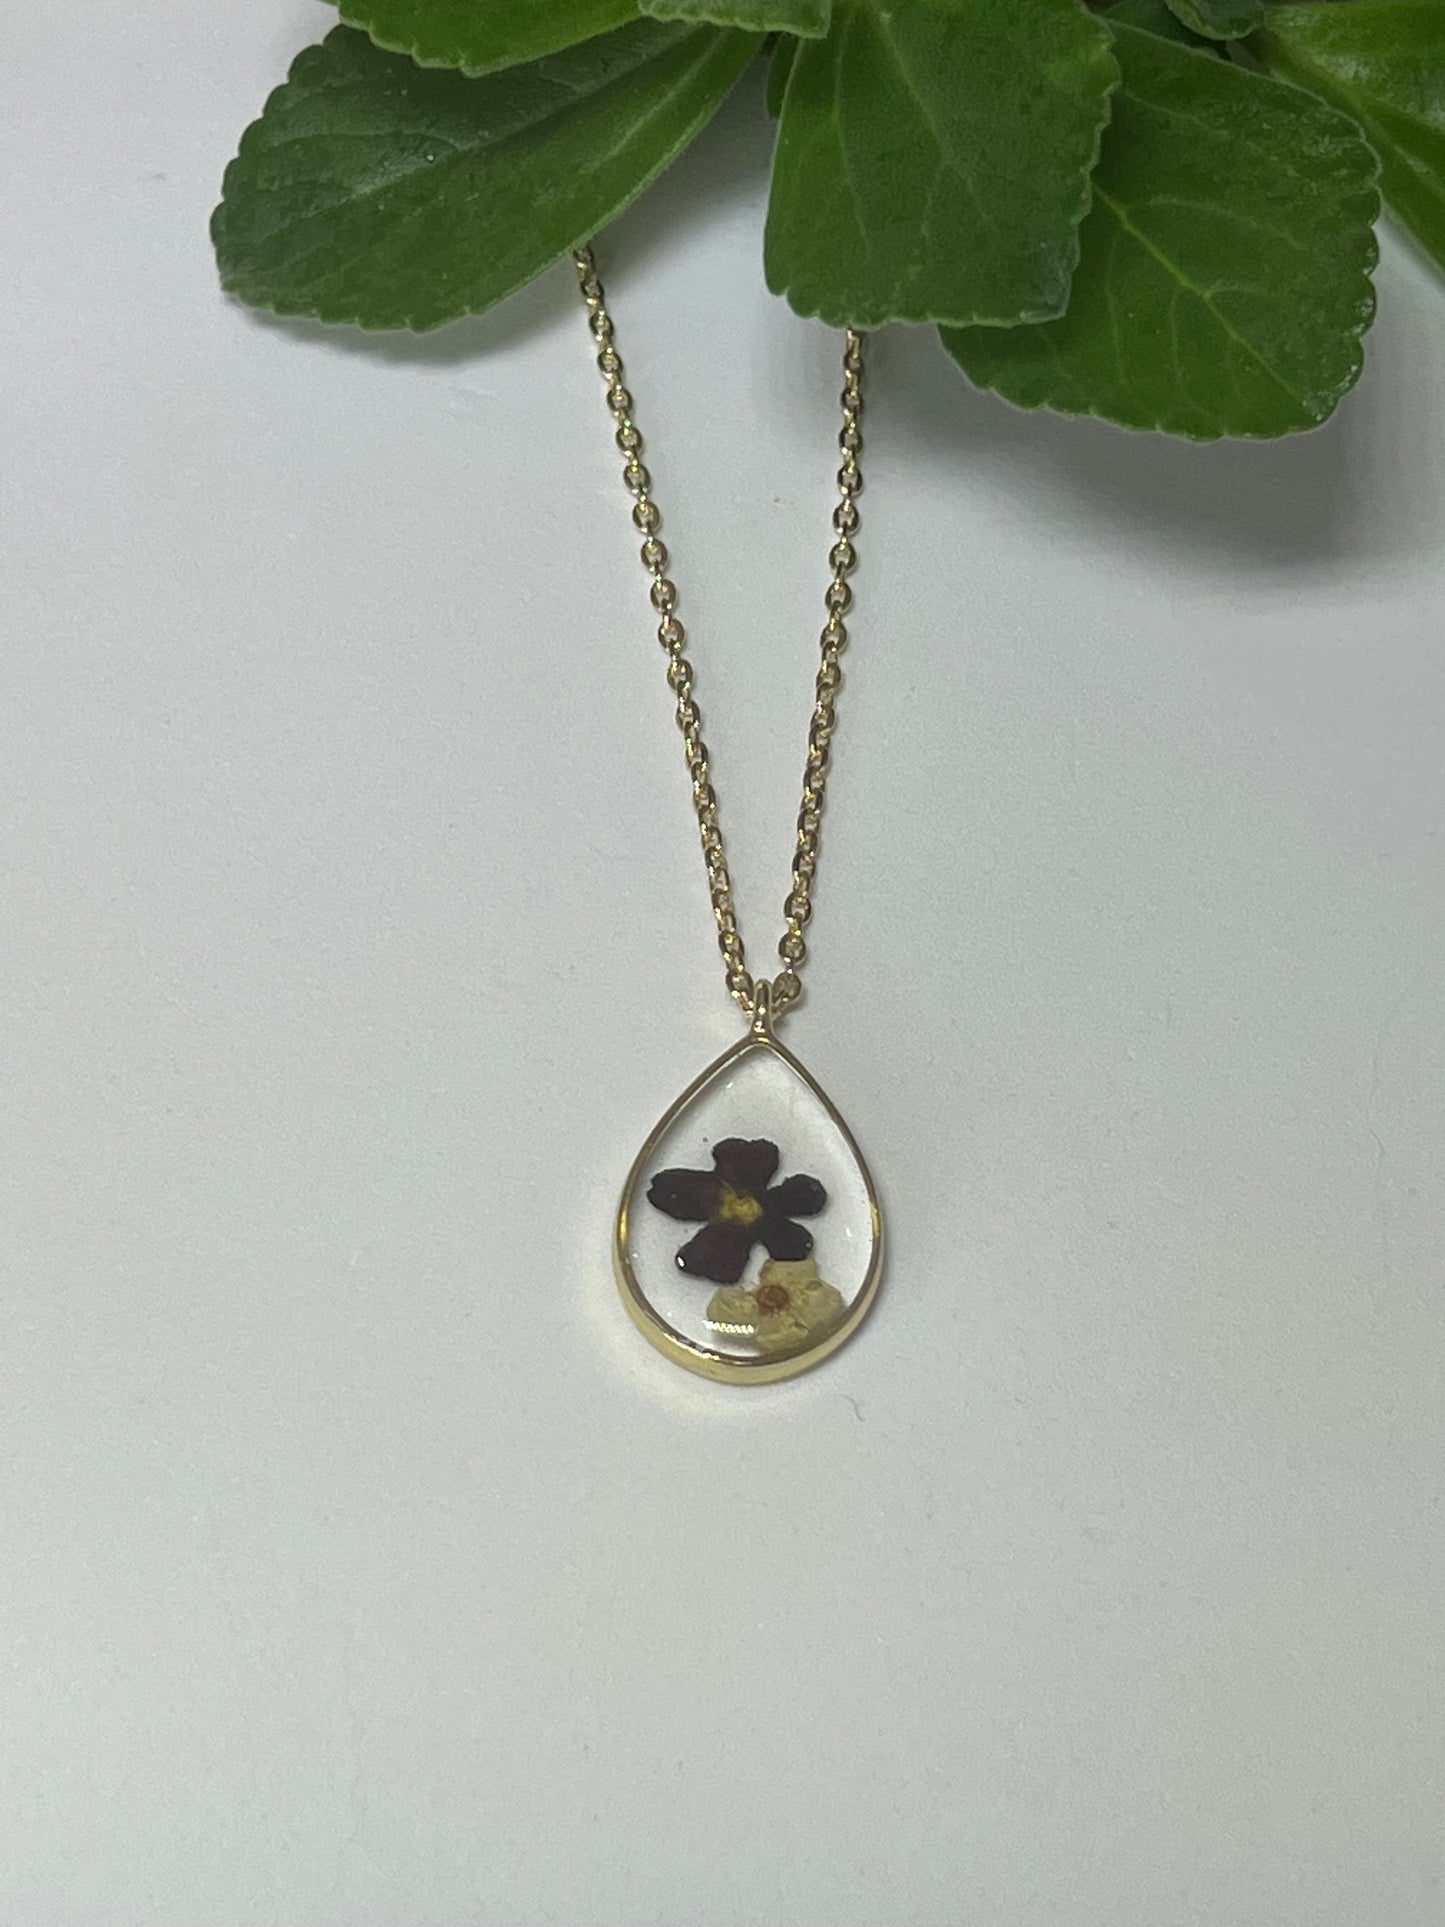 Tear drop two real tiny flowers necklace